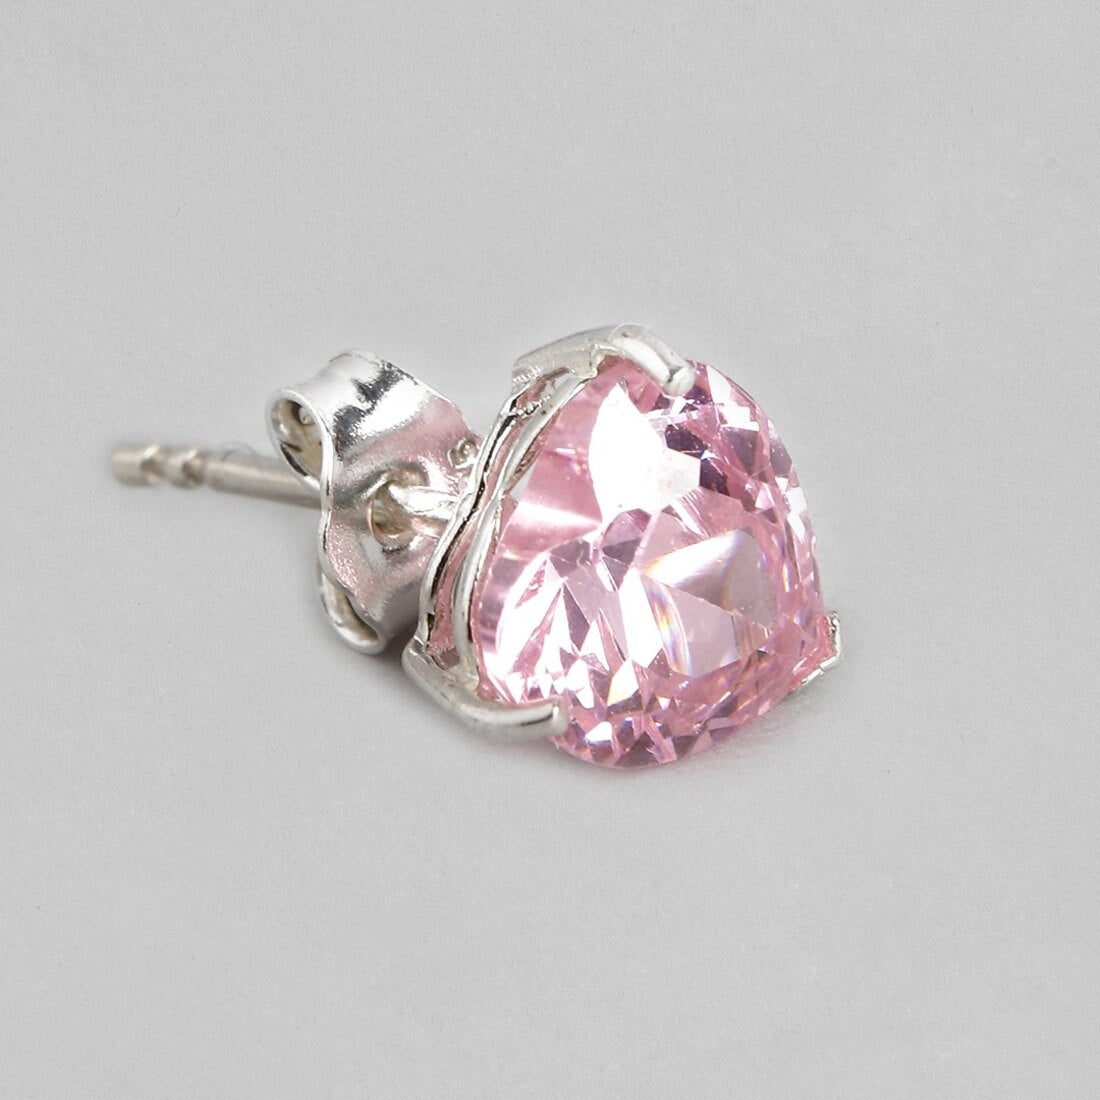 Pink Solitaire Rhodium Plated 925 Silver Stud Earrings